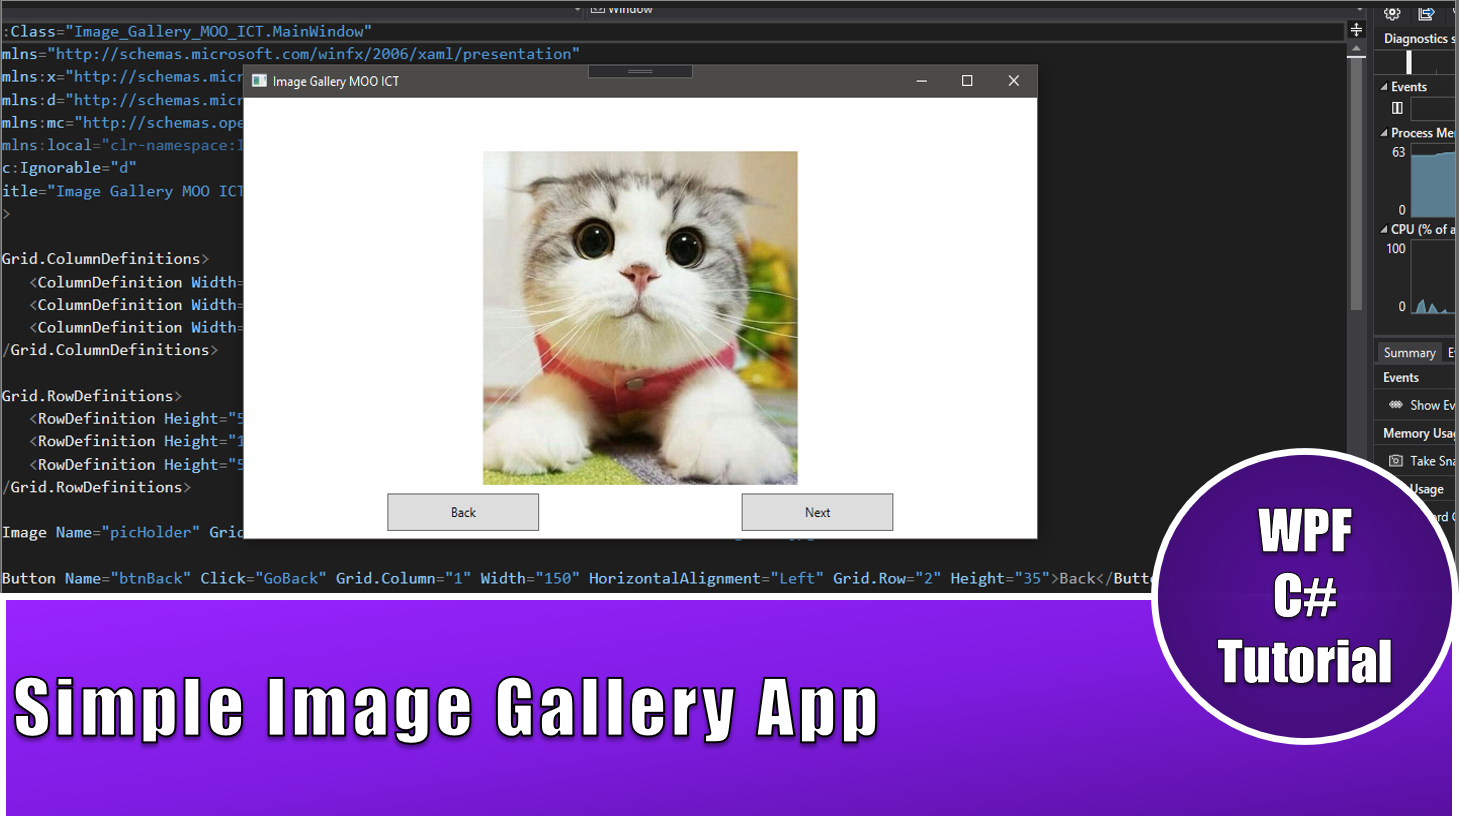 PDF: Edit content of PDF page in WPF image viewer.